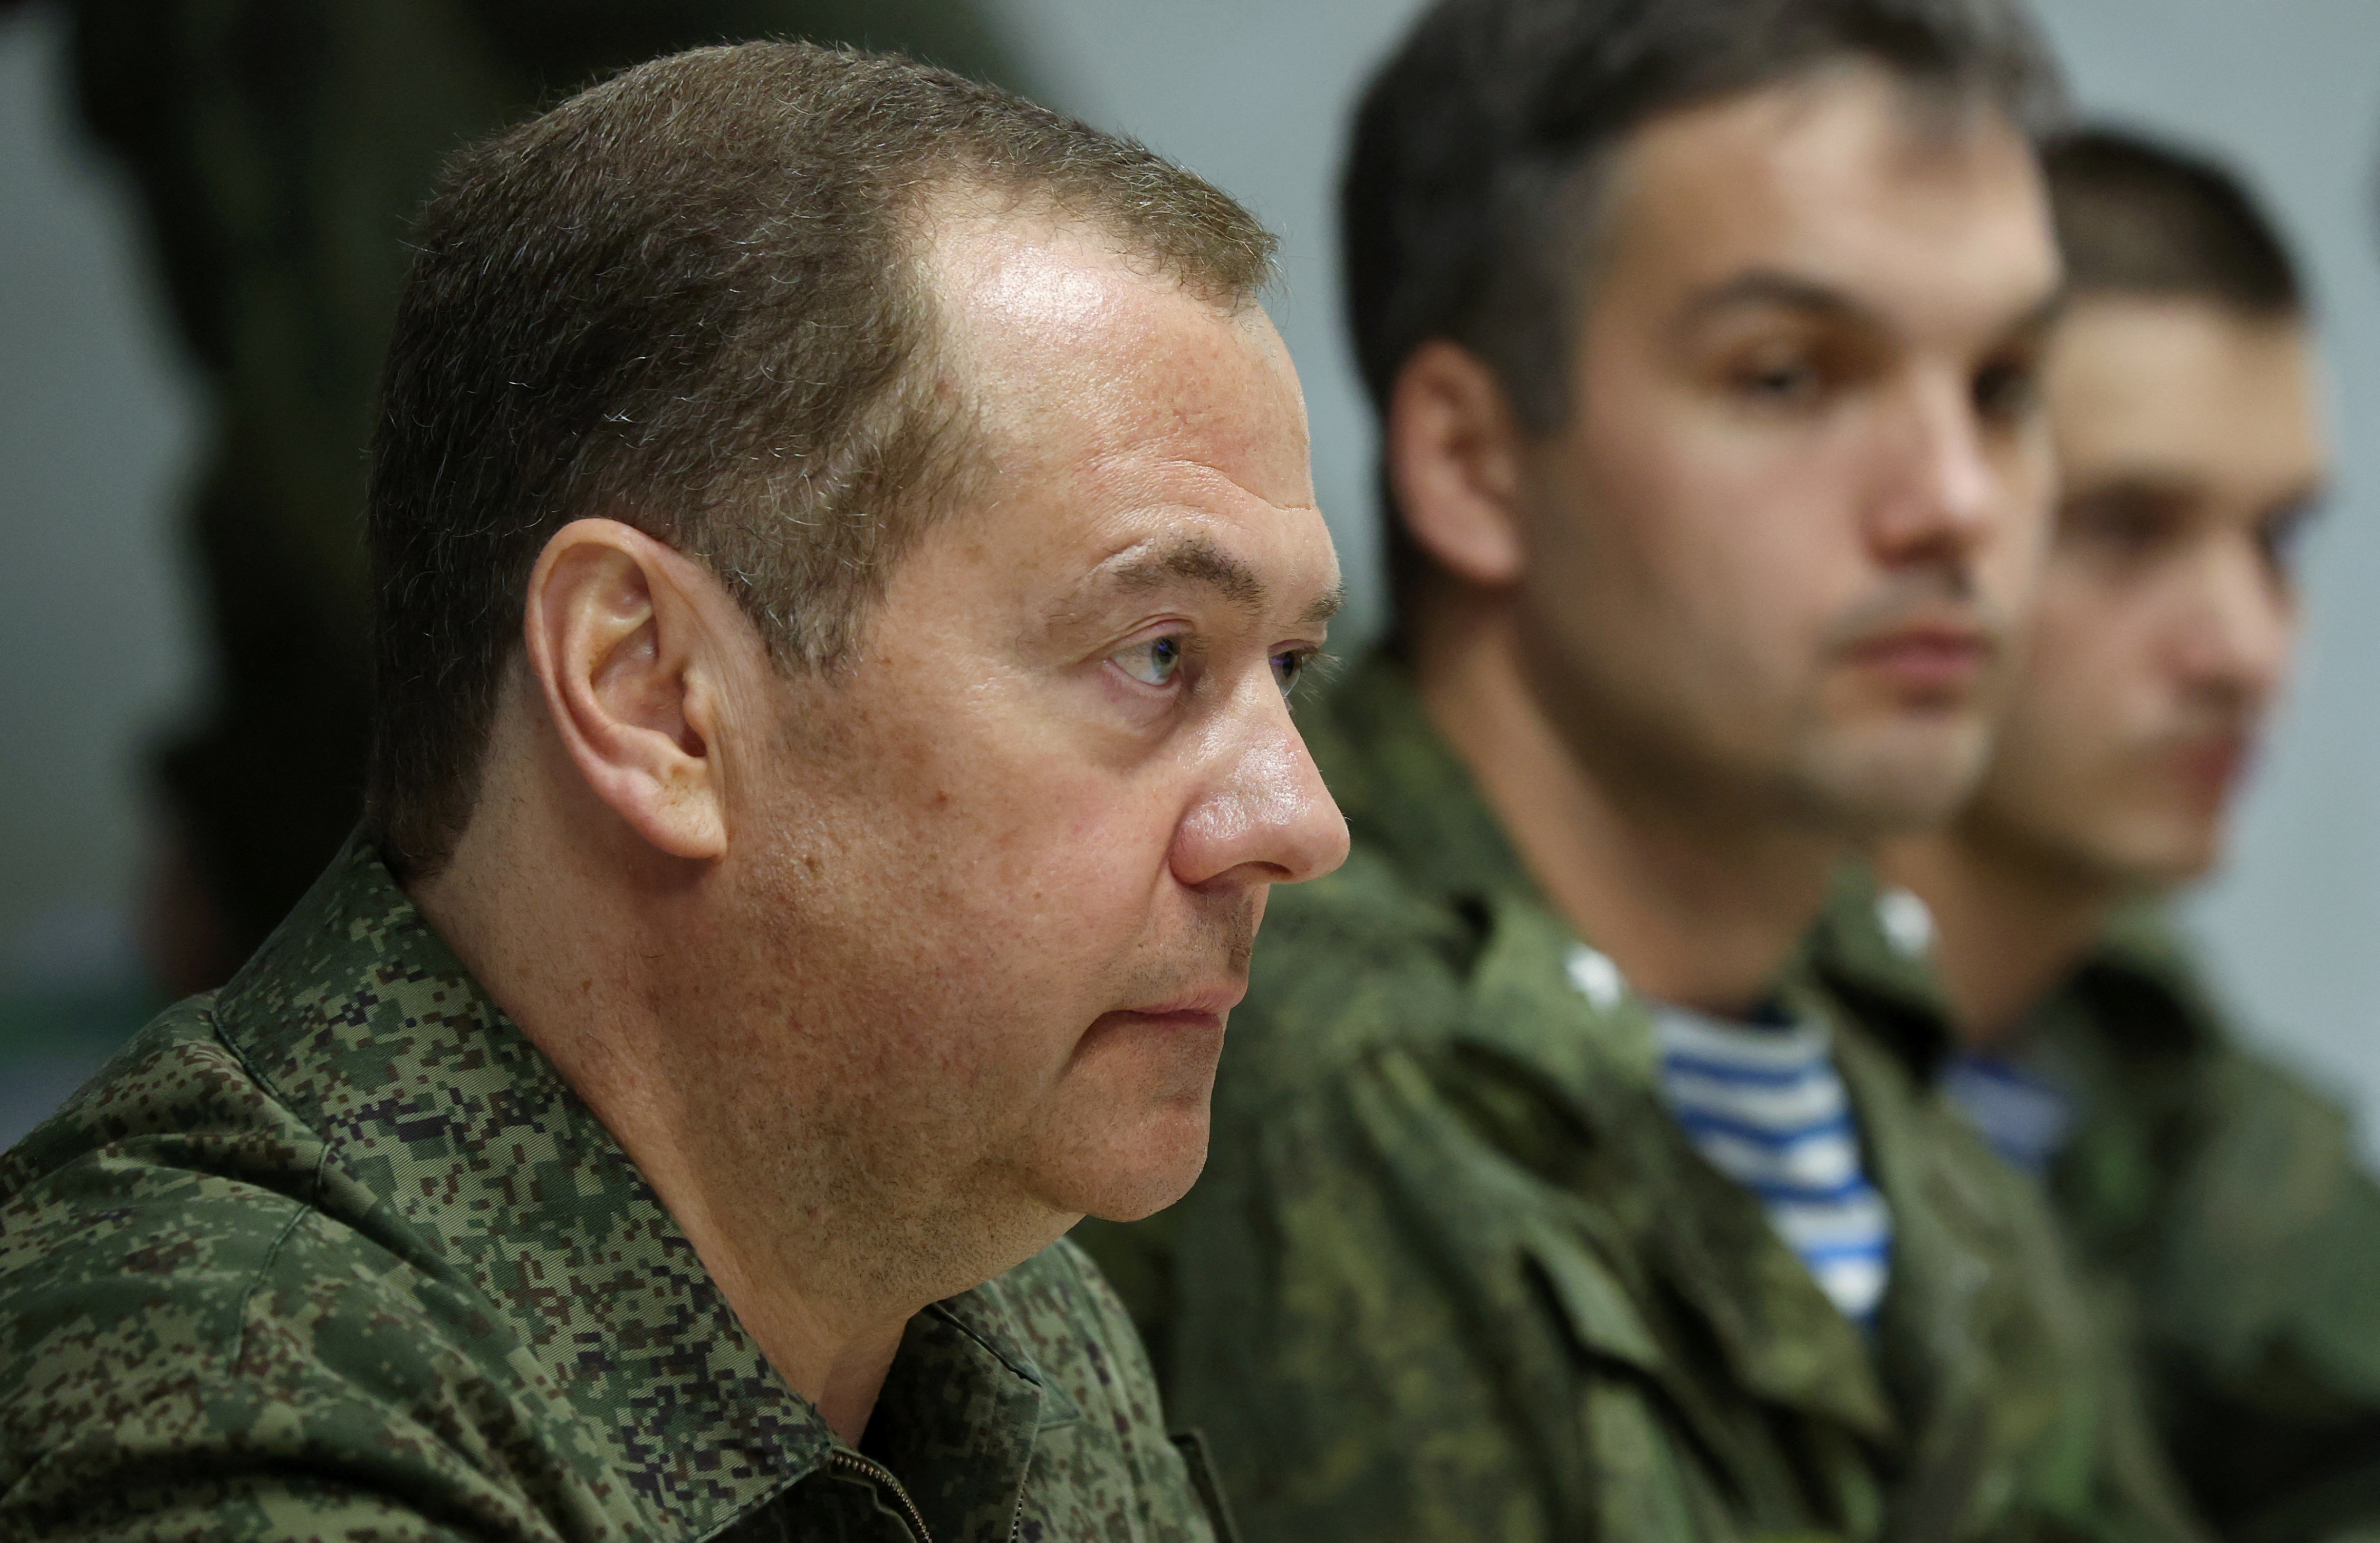 Russia's Security Council deputy head Medvedev meets military personnel in Ulyanovsk region